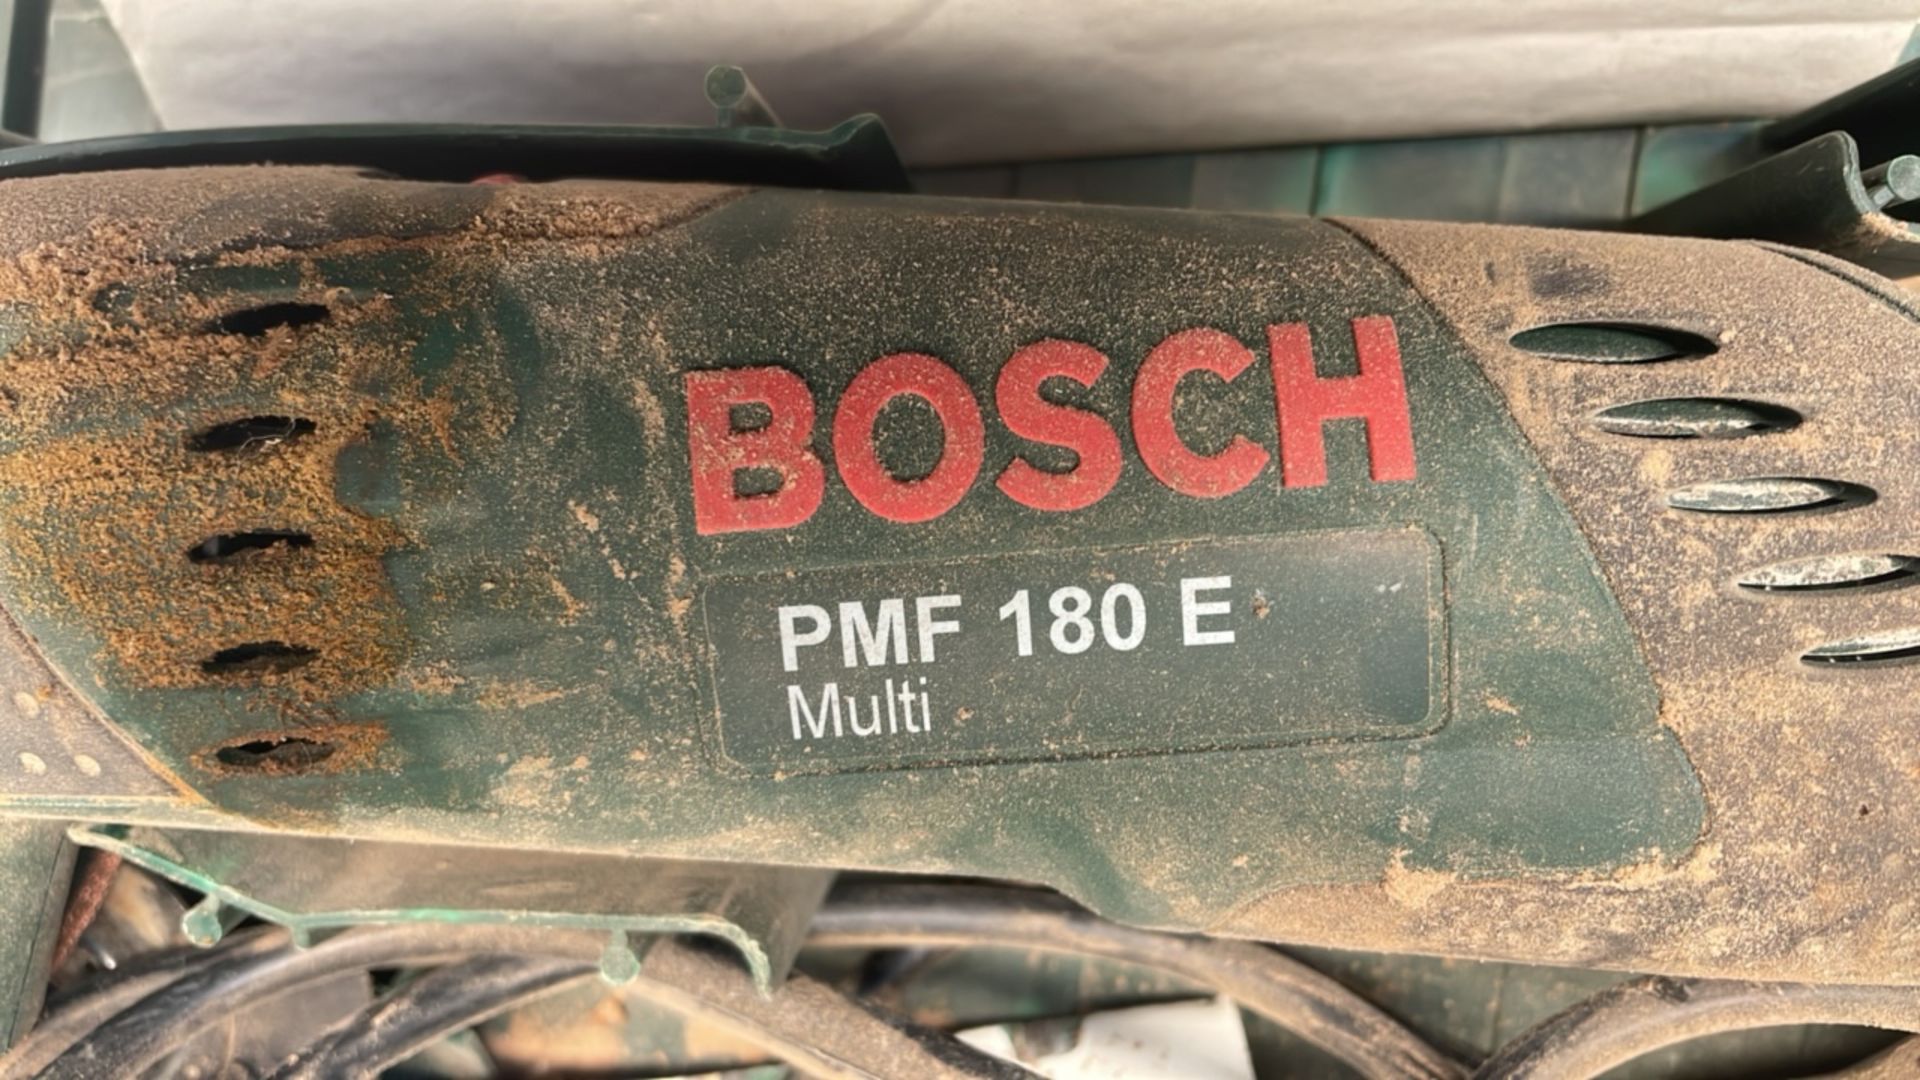 Bosch PMF180E Multi-Functional Oscillating Multi-Tool - Image 3 of 3